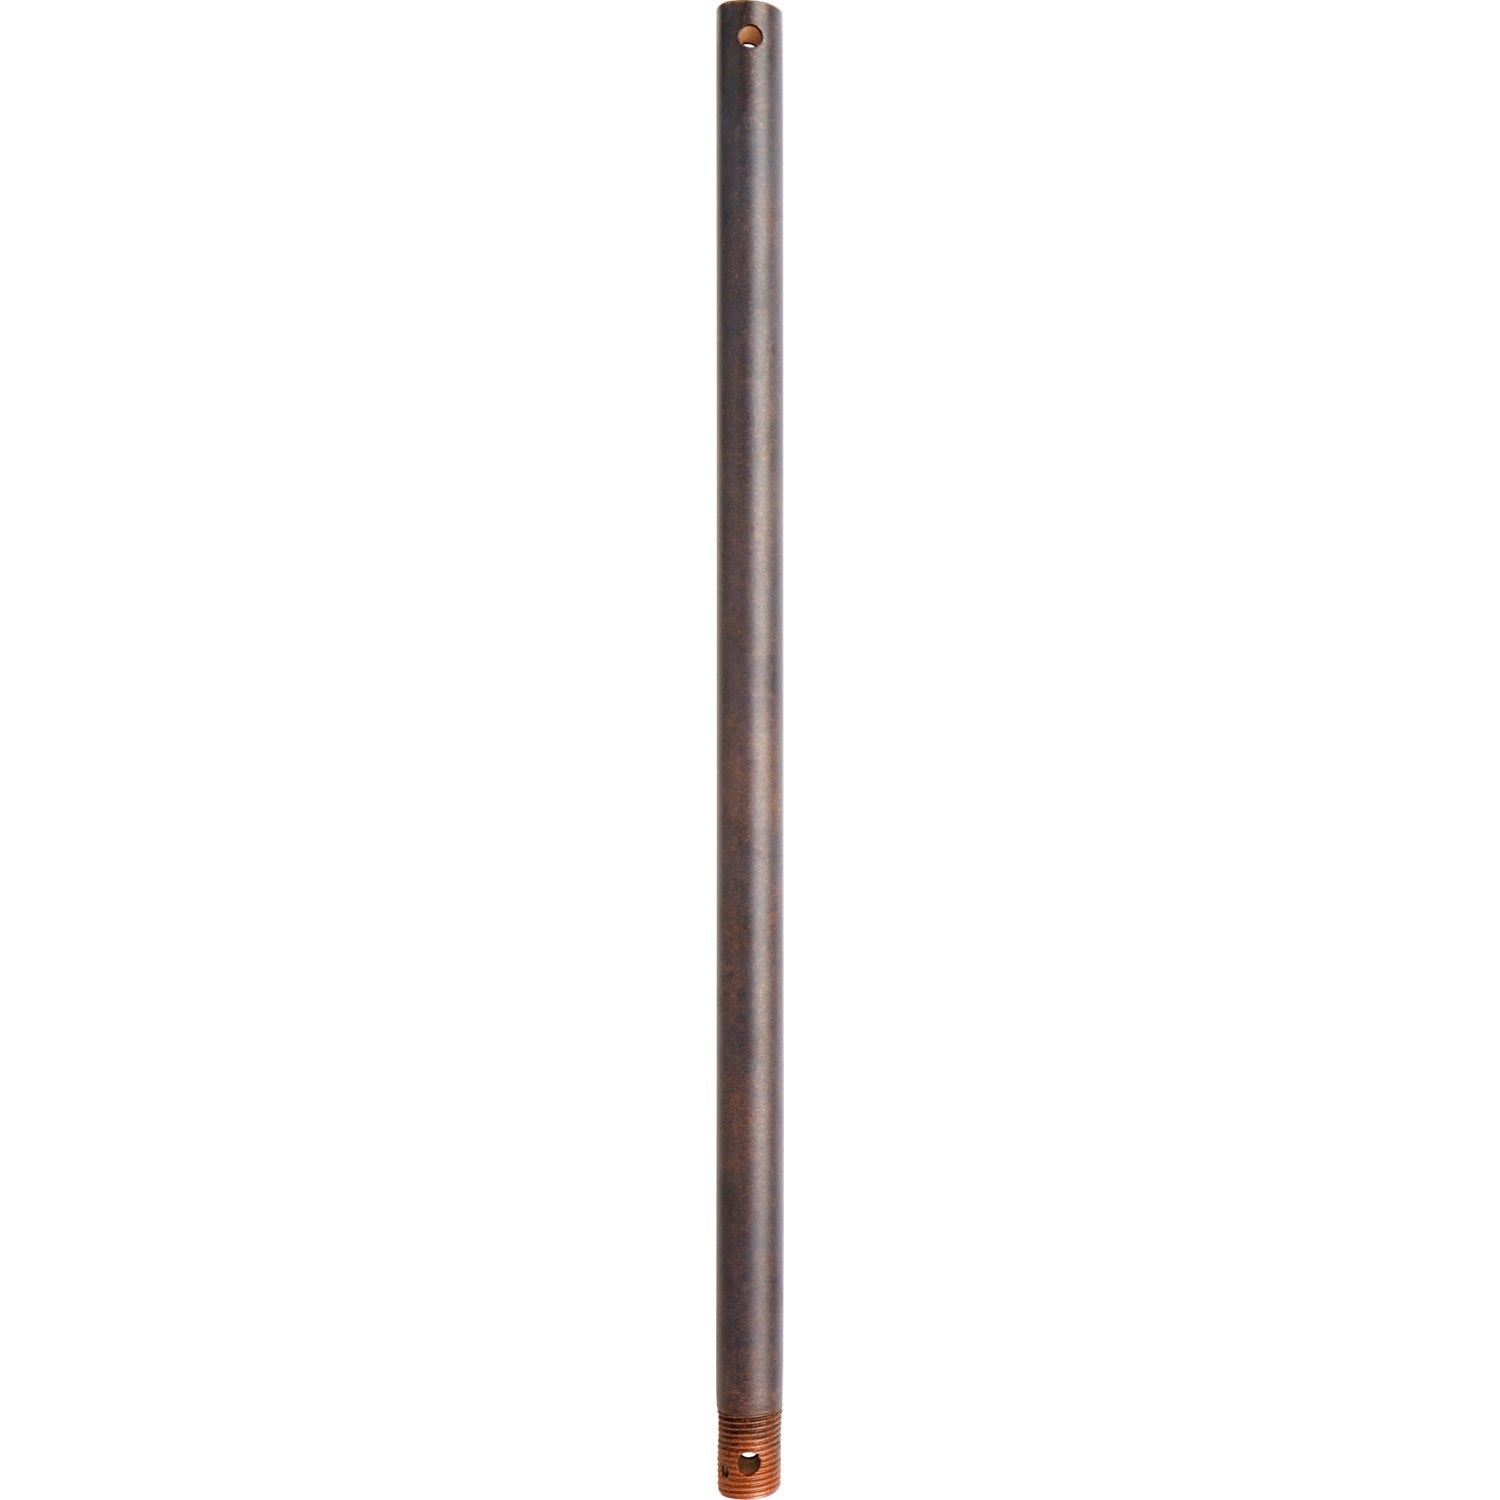 Quorum - 6-0644 - Downrod - 6 in. Downrods - Toasted Sienna